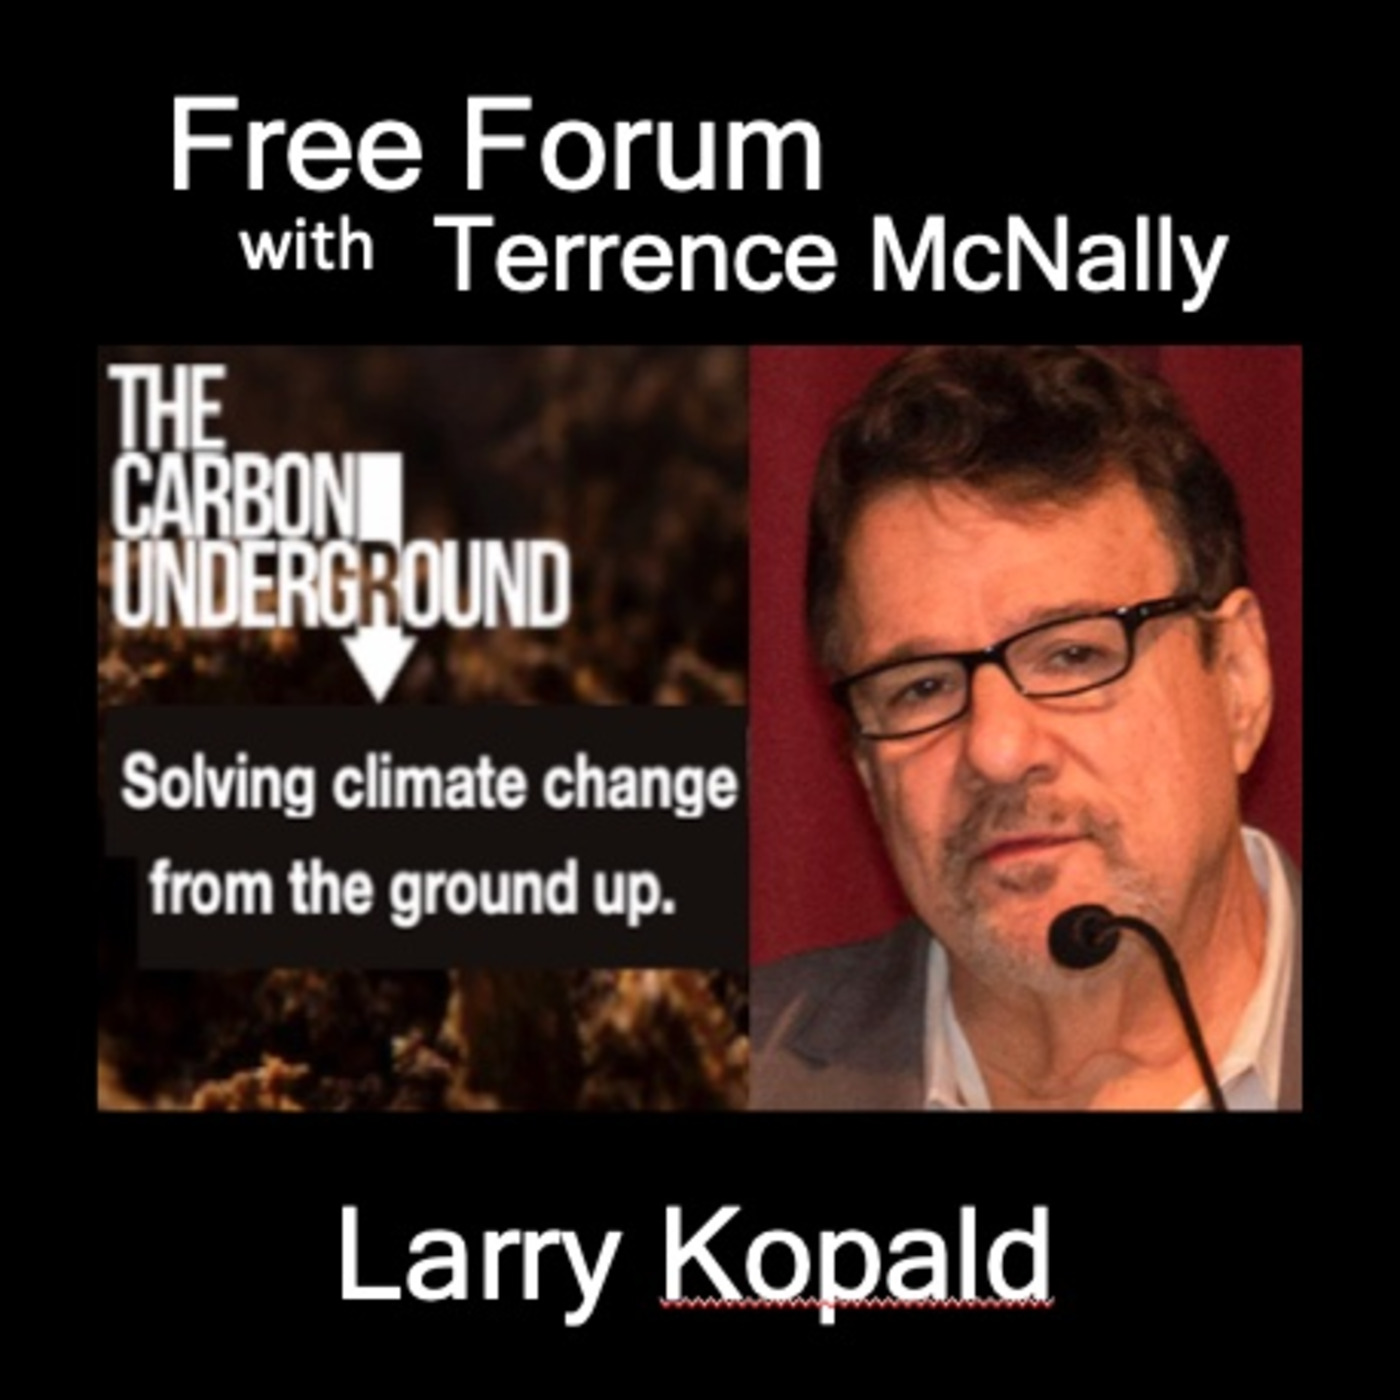 Episode 547: LARRY KOPALD, The Carbon Underground - We can reverse climate change and restore the soil with regenerative agriculture.